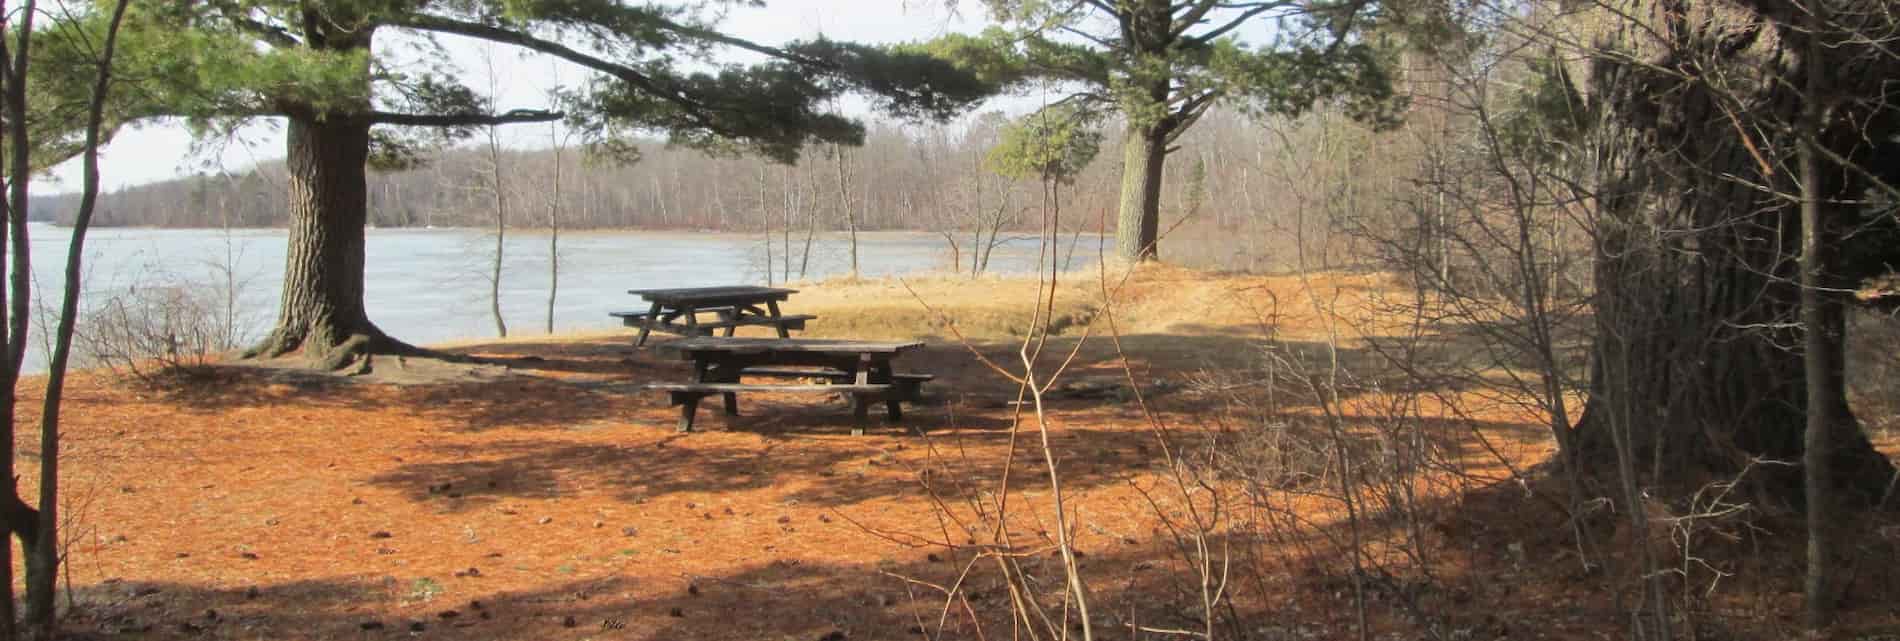 picnic-tables-under-pines-with-lake-in-background-on-a-sunny-fall-day